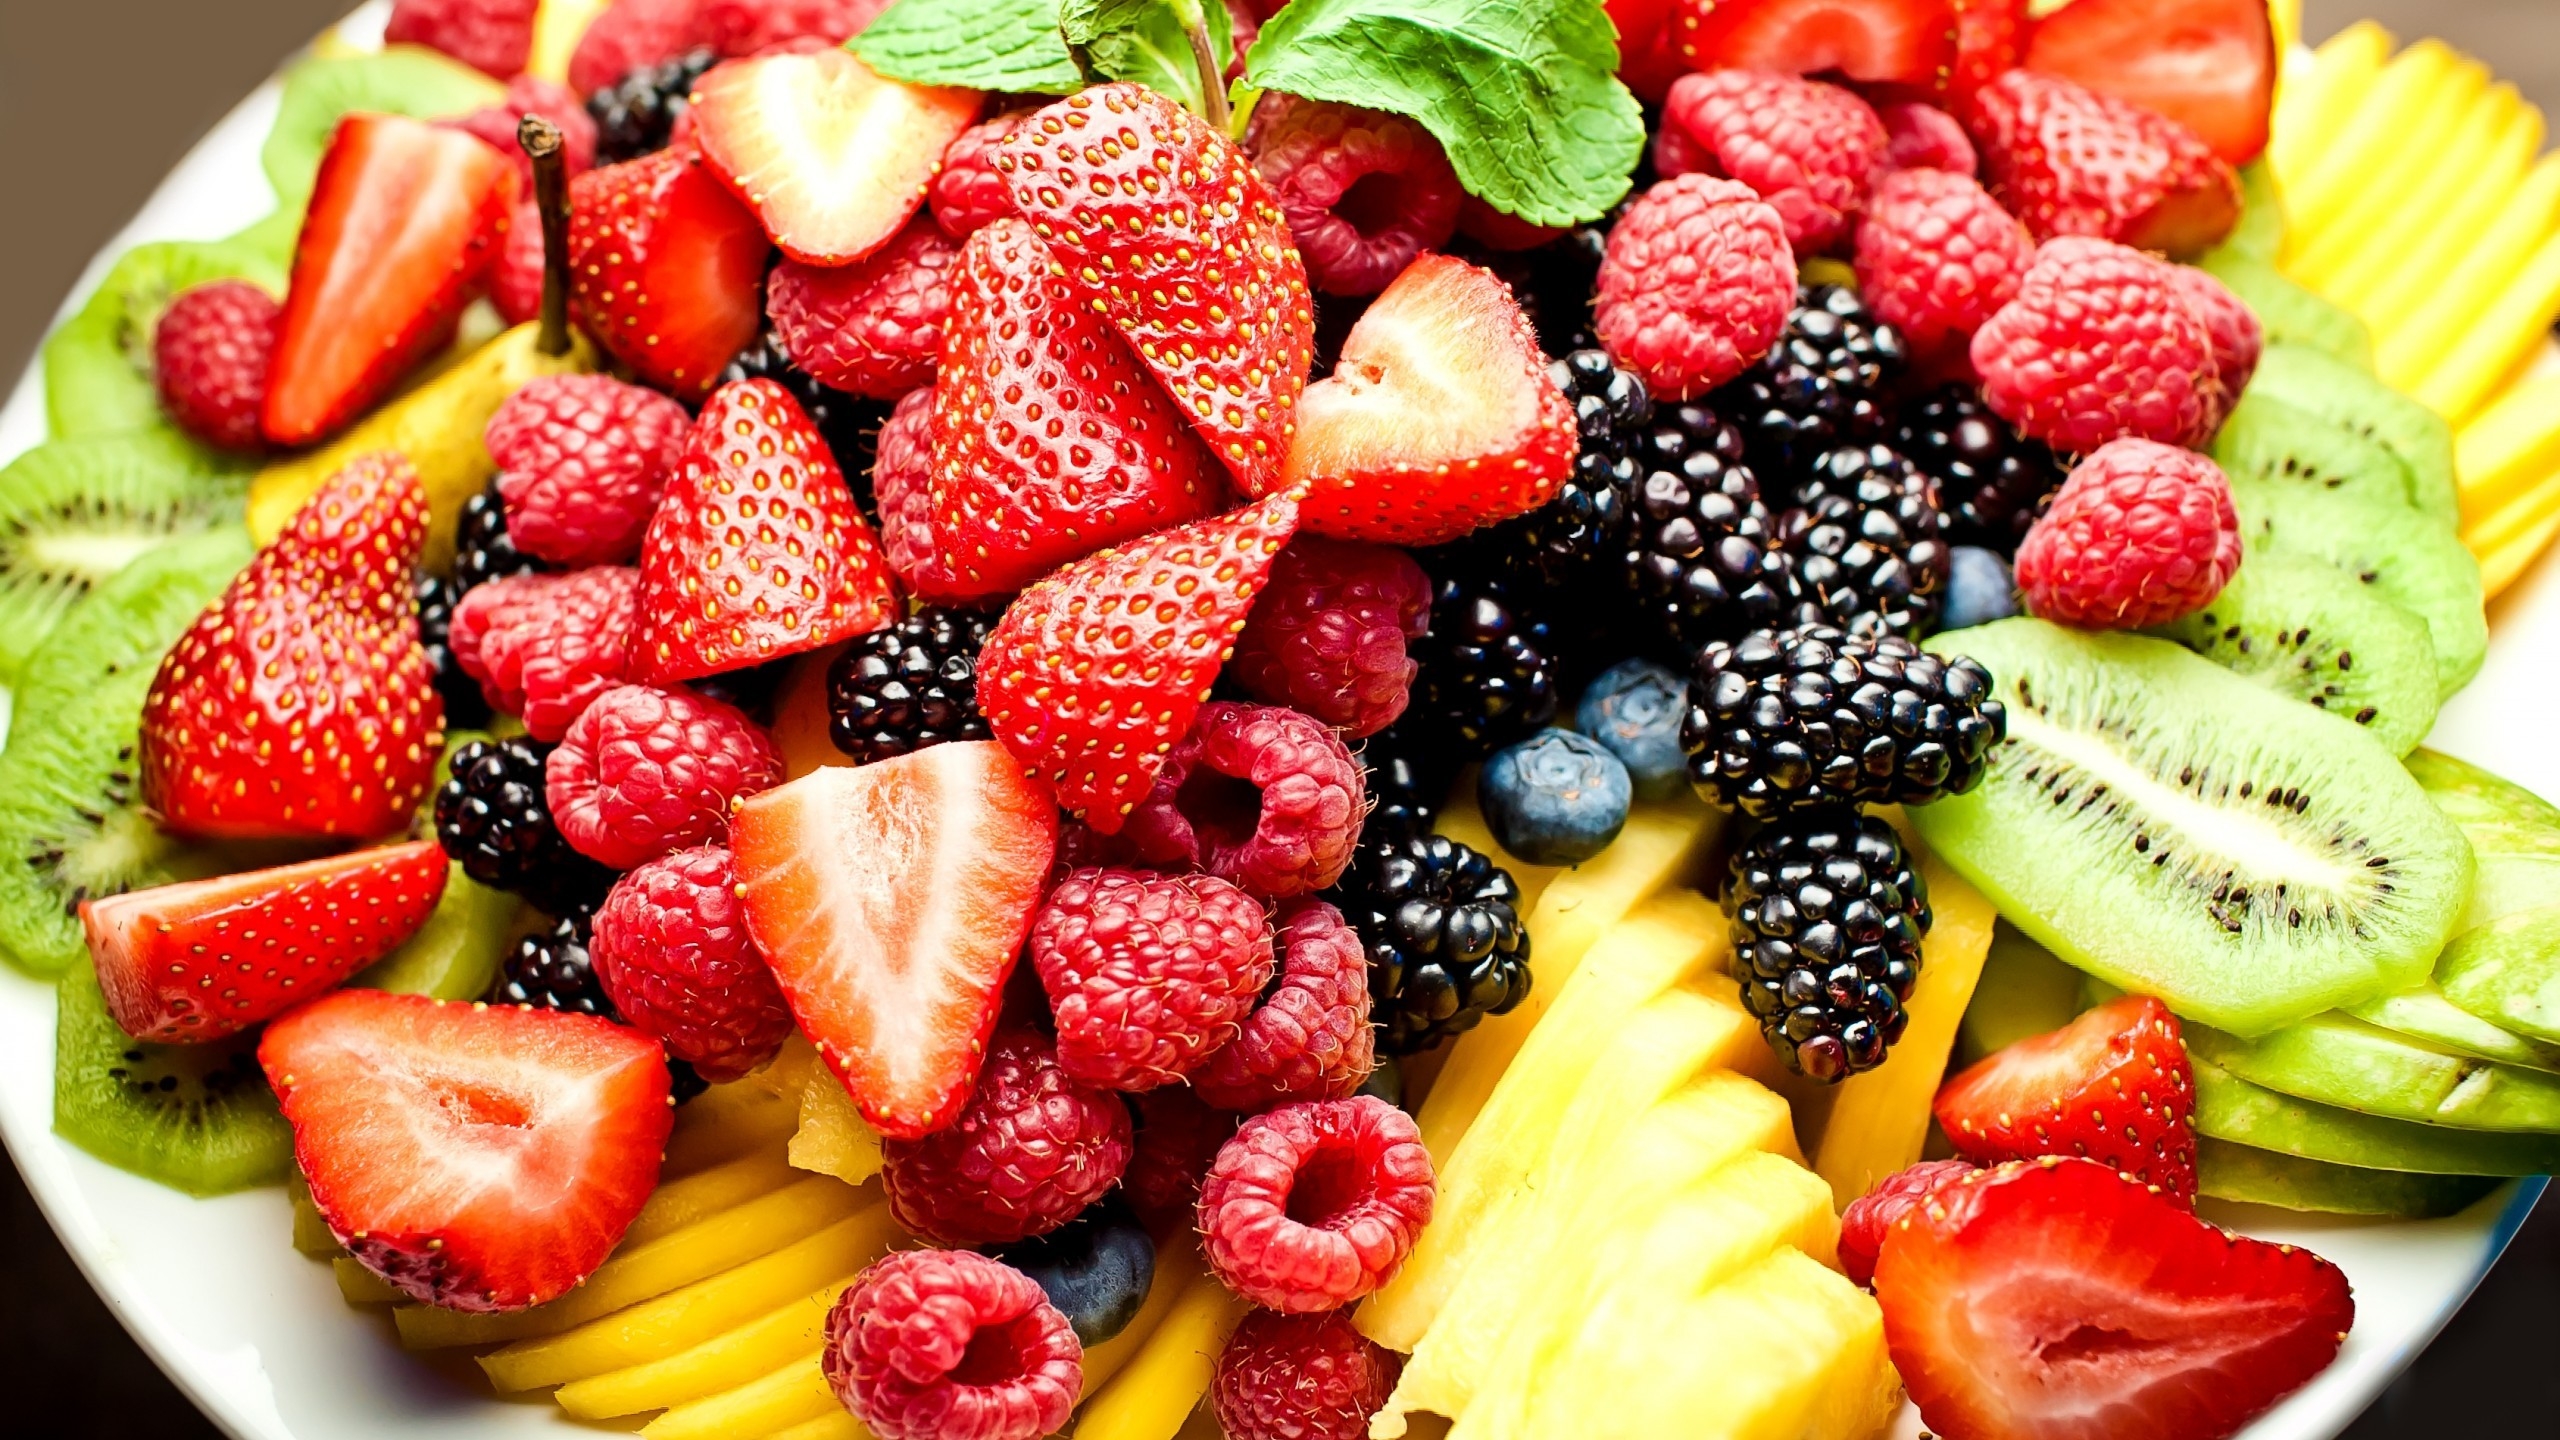 Fruits Plate for 2560x1440 HDTV resolution